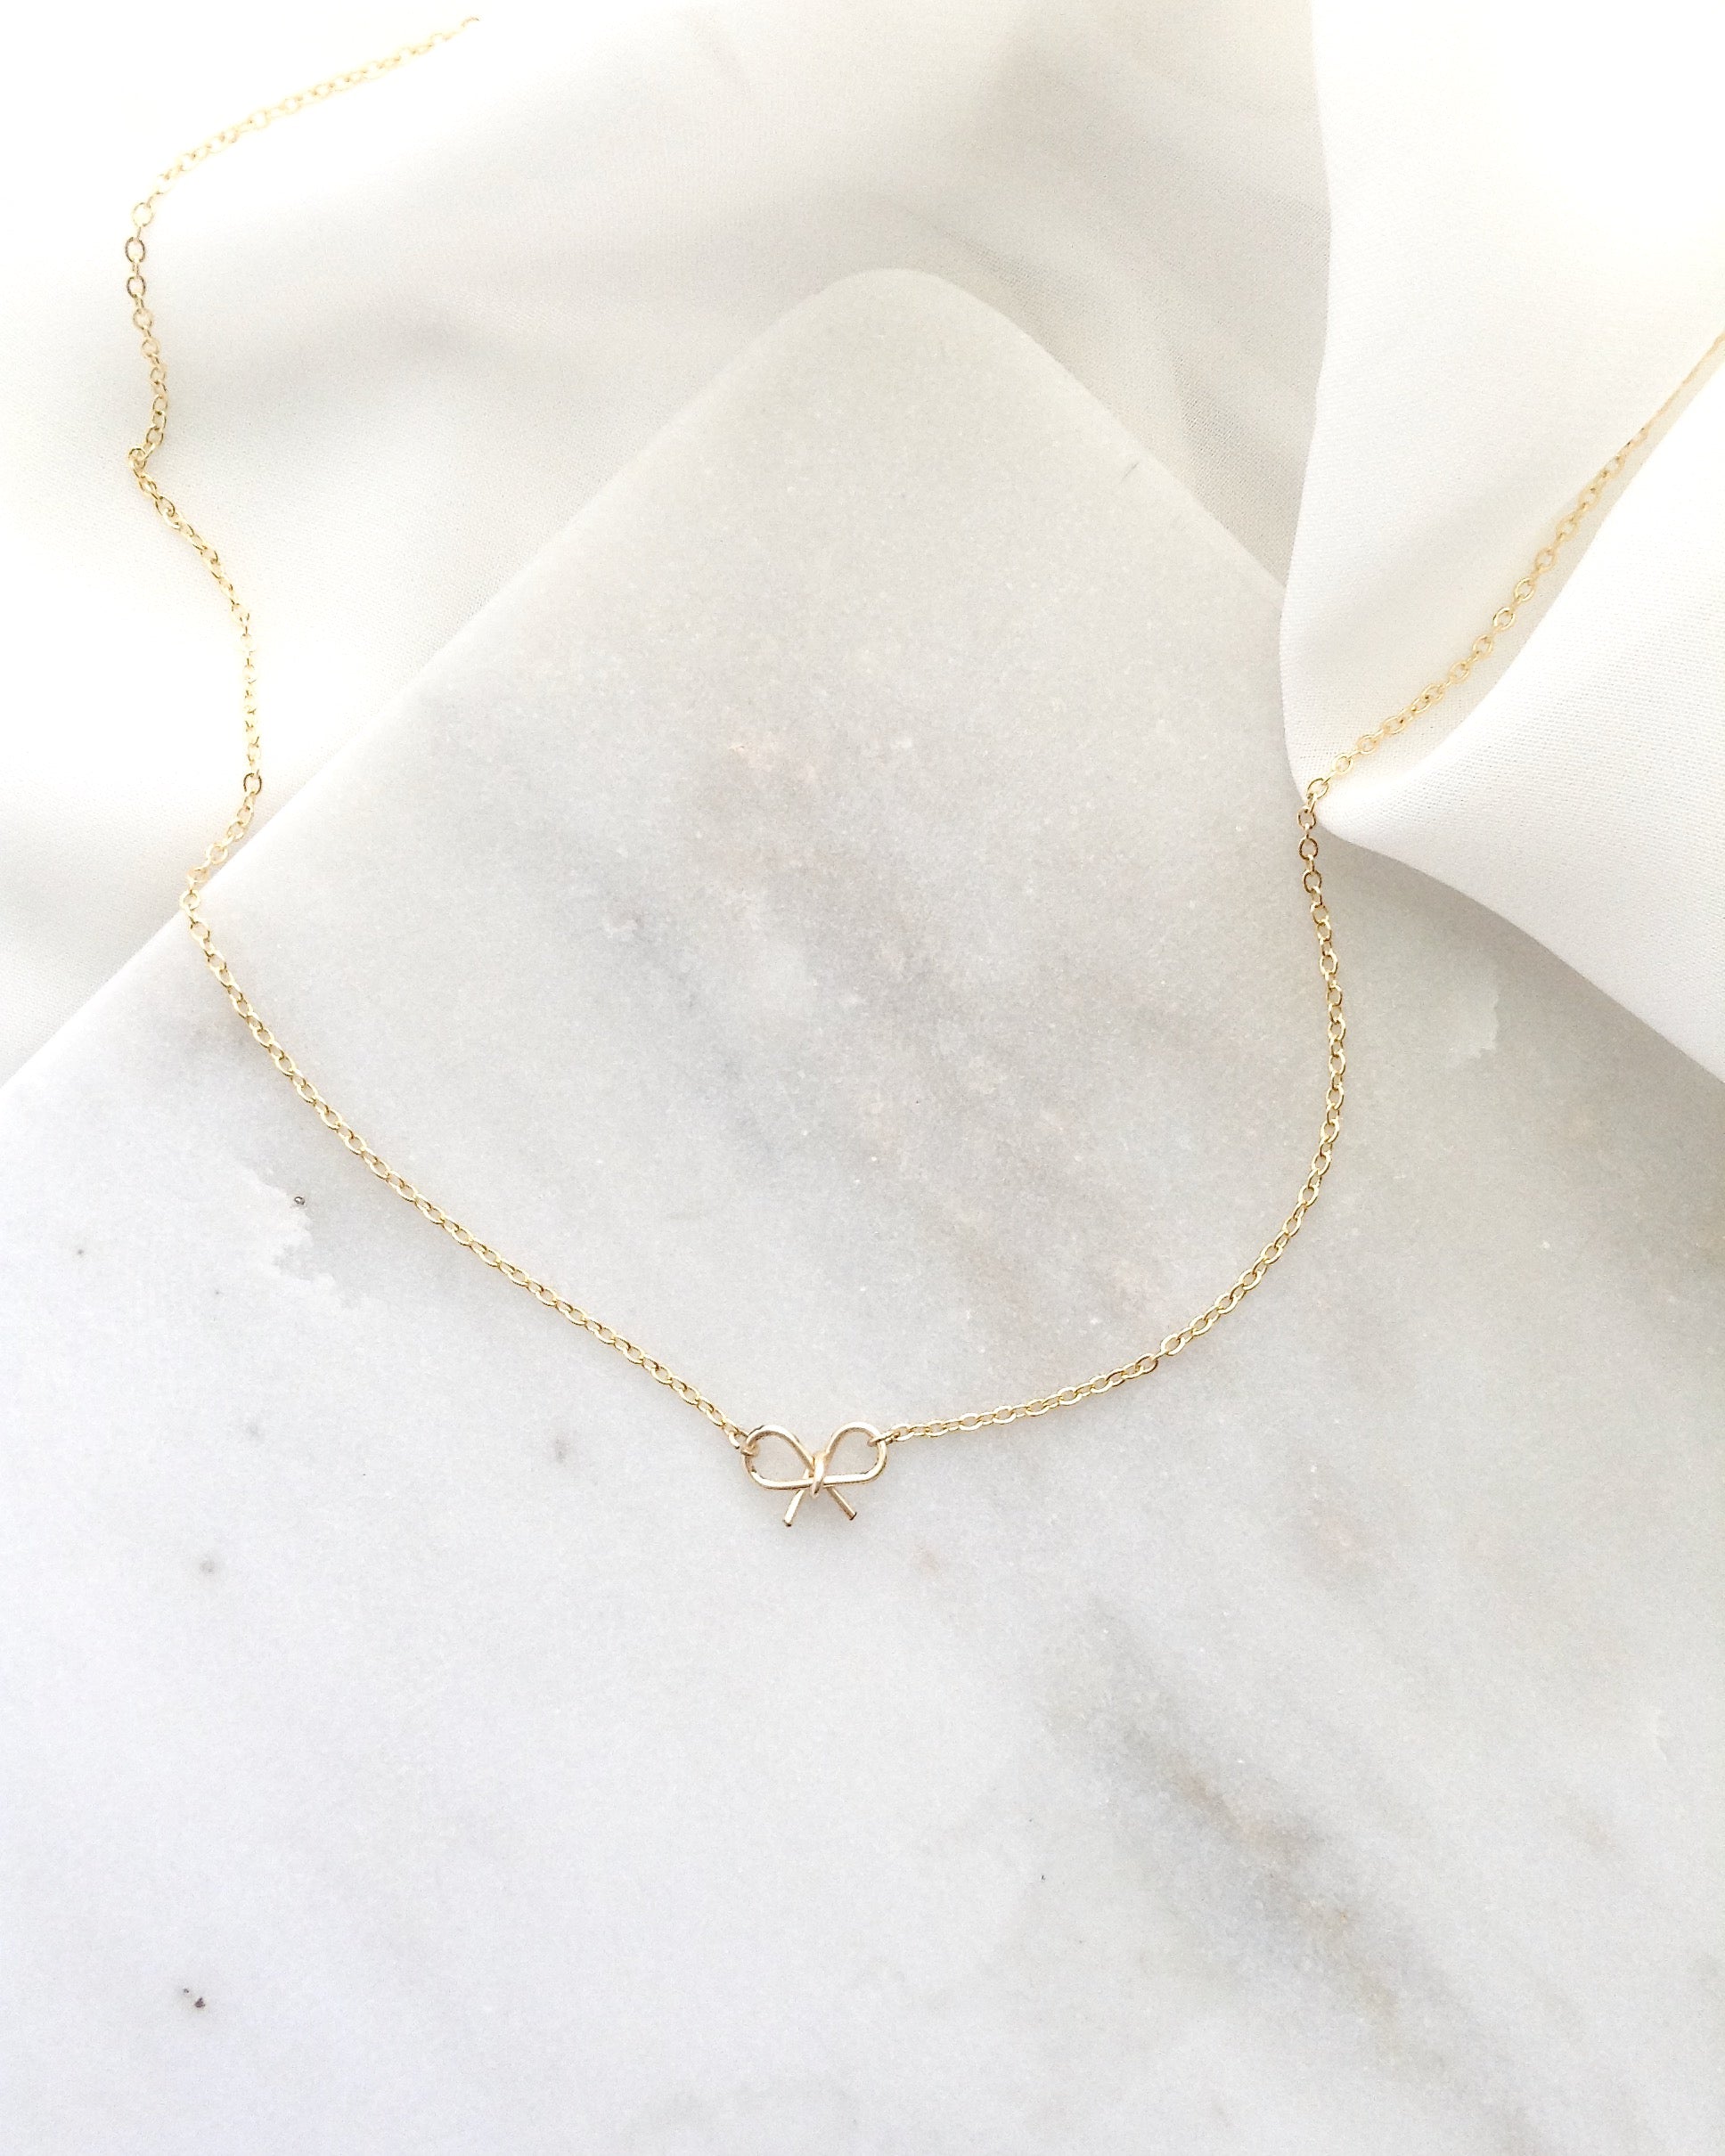 Dainty Choker Necklace | Thin Chain Choker | Delicate Choker in Gold Filled or Sterling Silver | Simple Choker | IB Jewelry